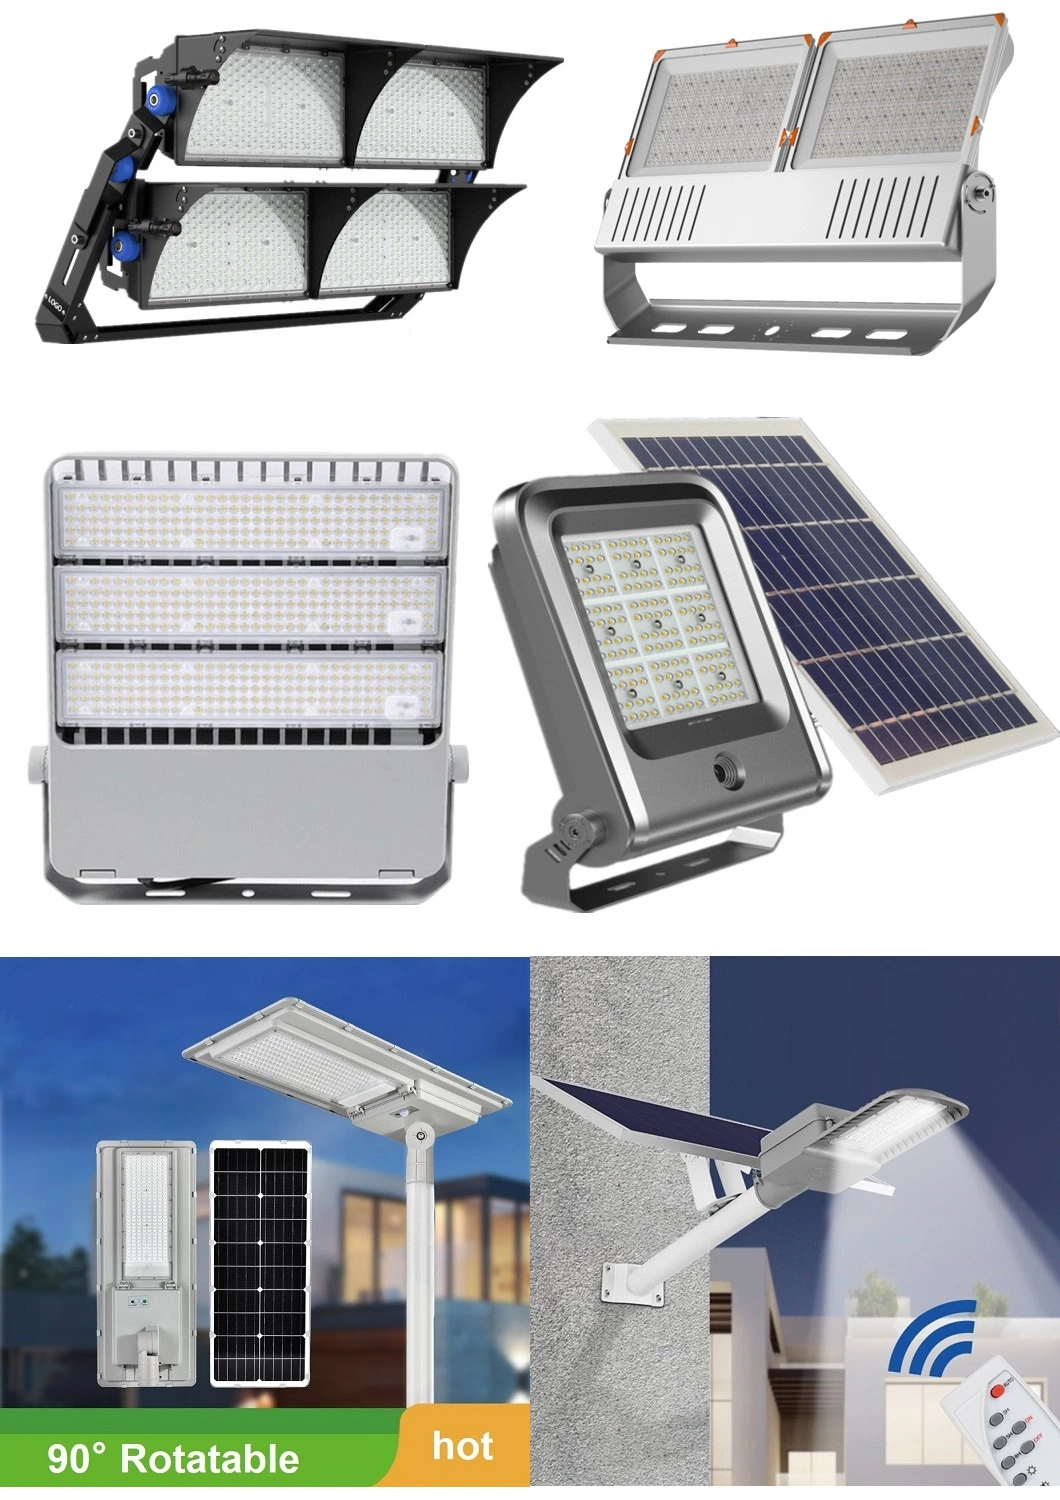 Urban Public LED All in One Road Street Outdoor Lighting with Solar Panel for House Garage Garden Yard